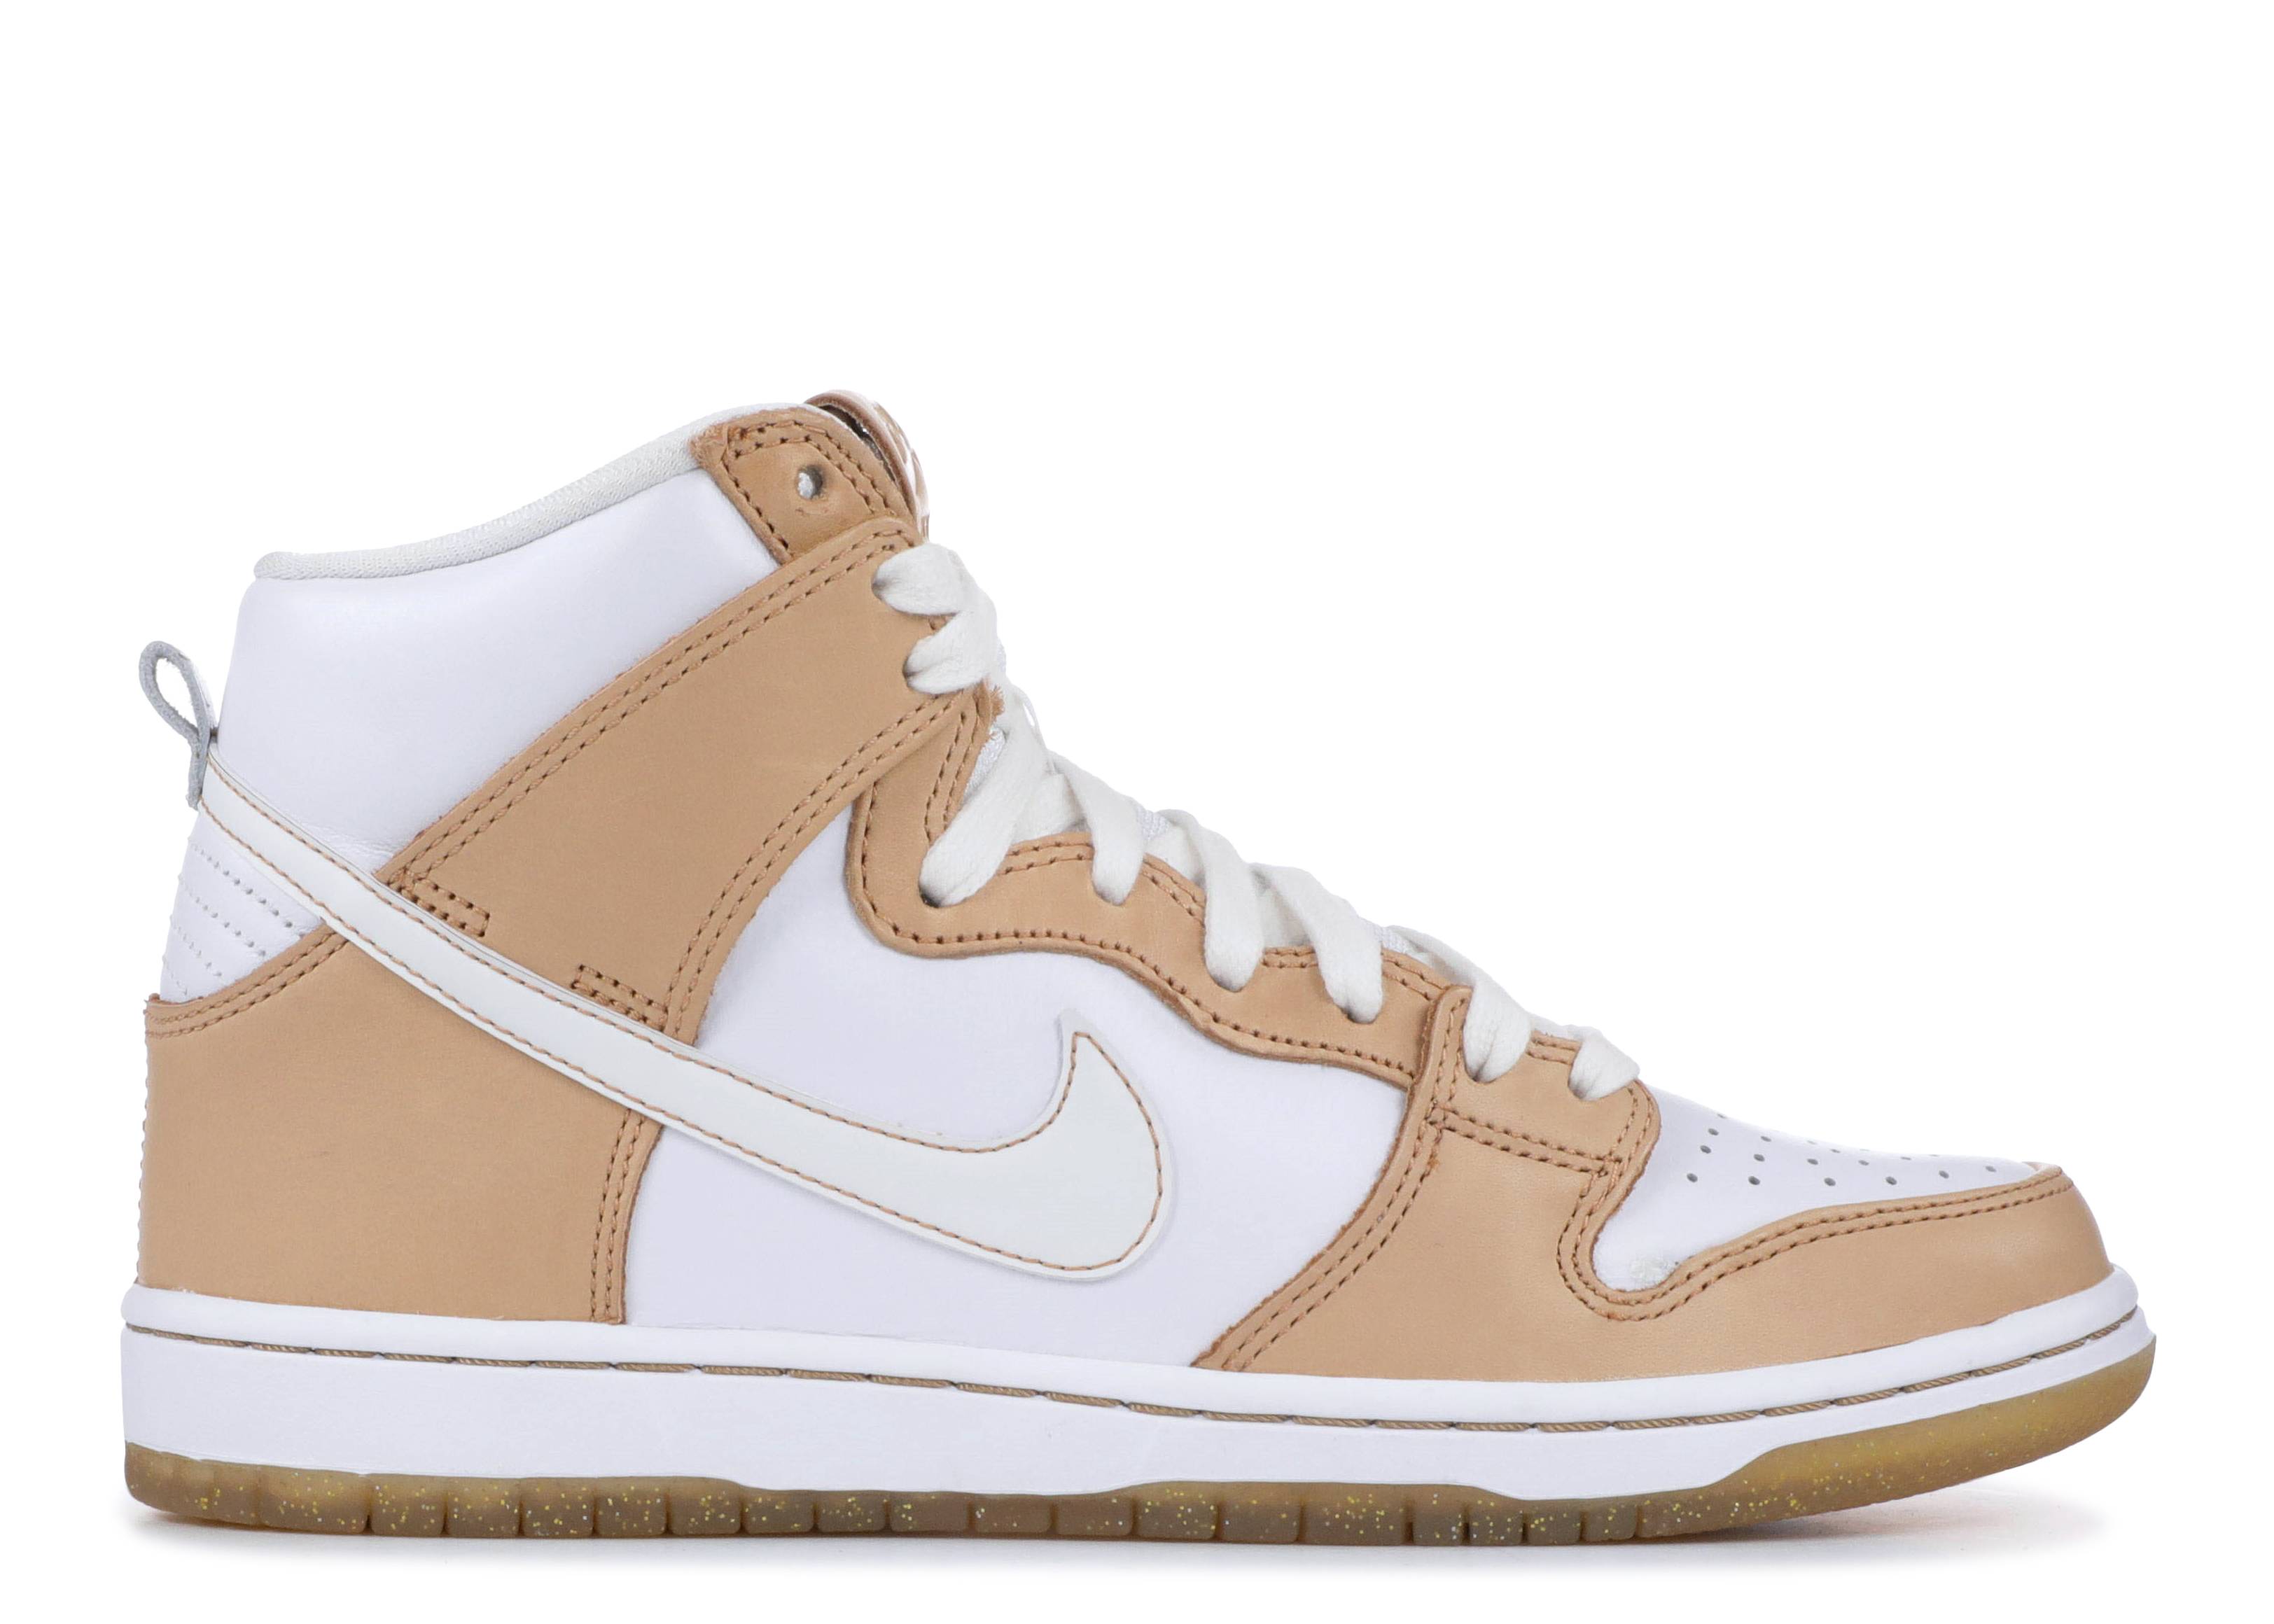 Premier x Dunk High SB TRD 'Win Some, Lose Some'